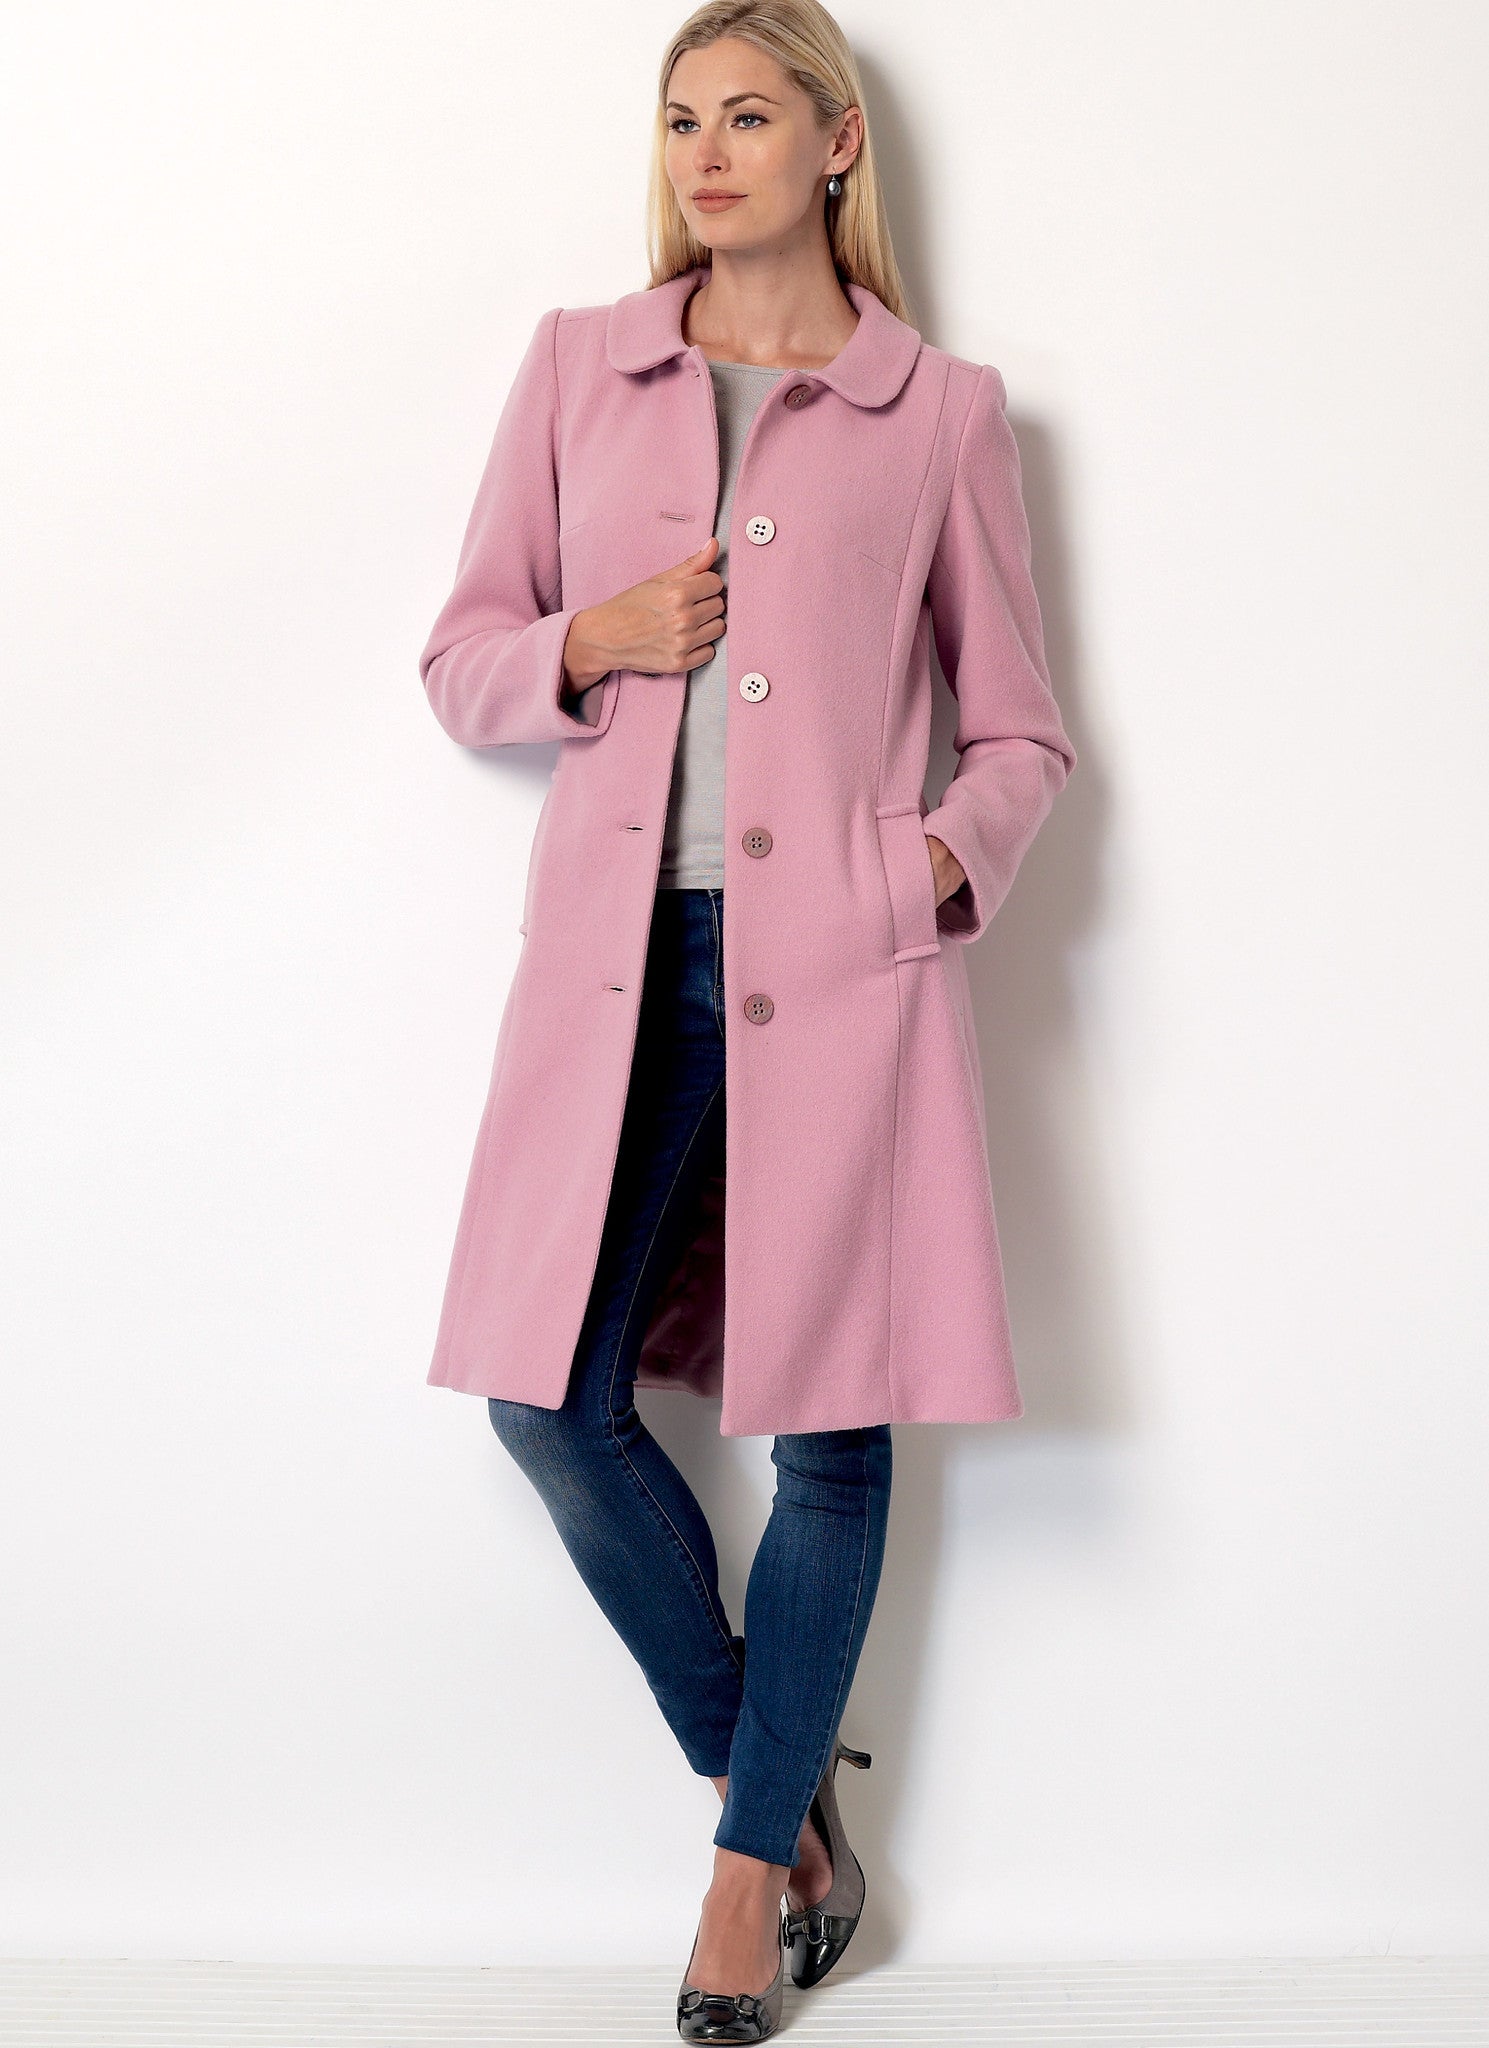 B6385 Misses' Funnel-Neck, Peter Pan or Pointed Collar Coats from Jaycotts Sewing Supplies